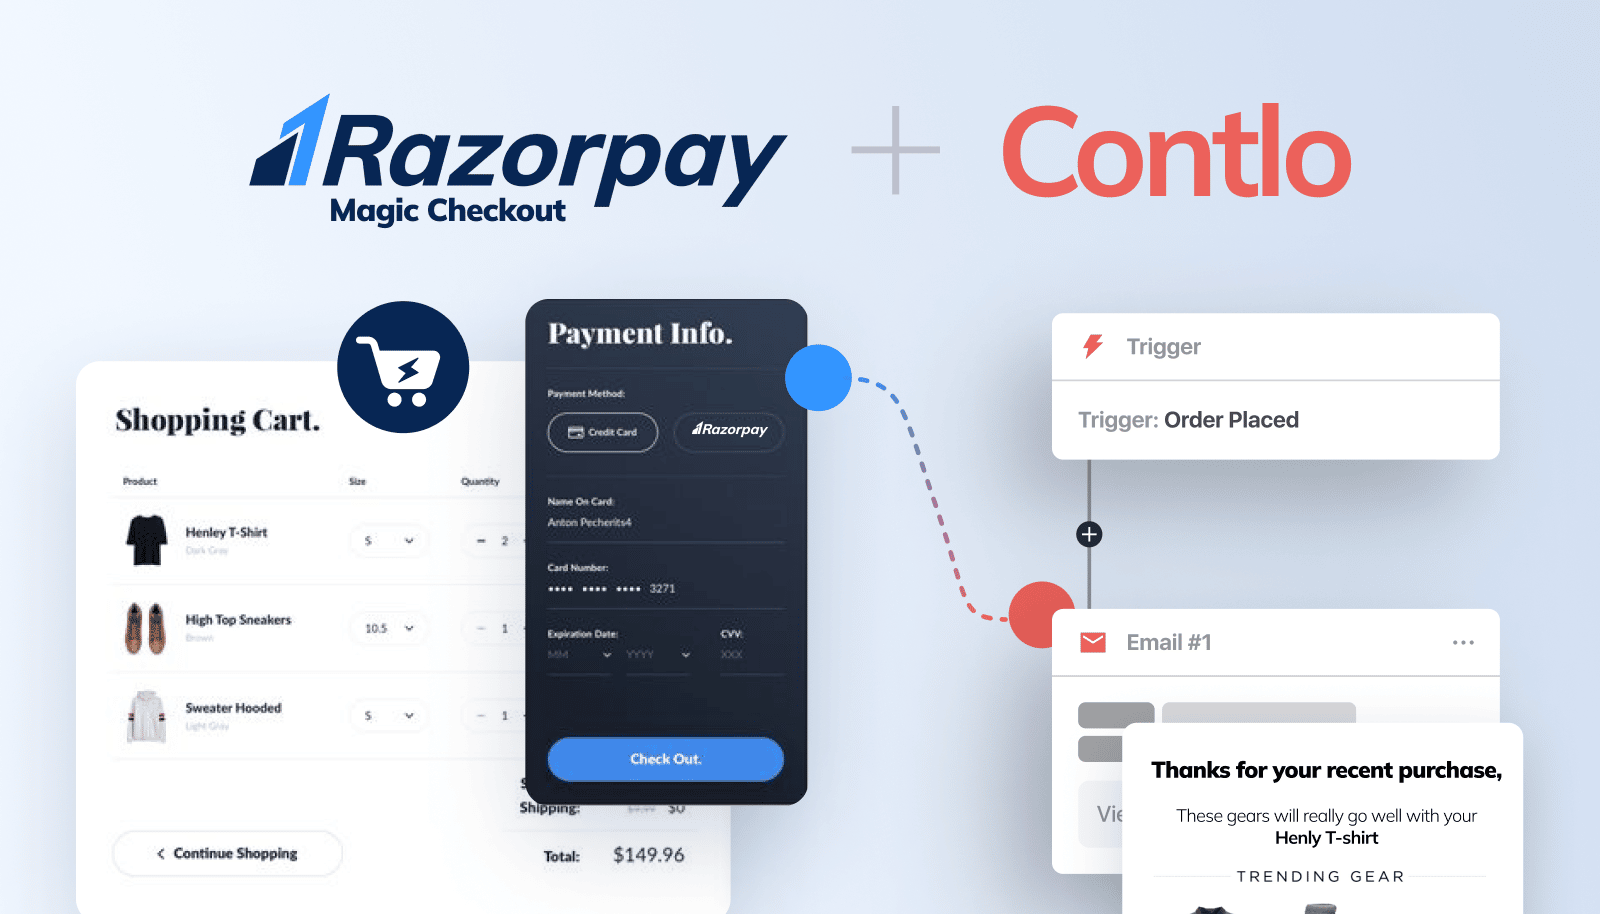 Contlo Partners with Razorpay Magic Checkout to Supercharge the Post-Checkout Journeys for D2C Brands